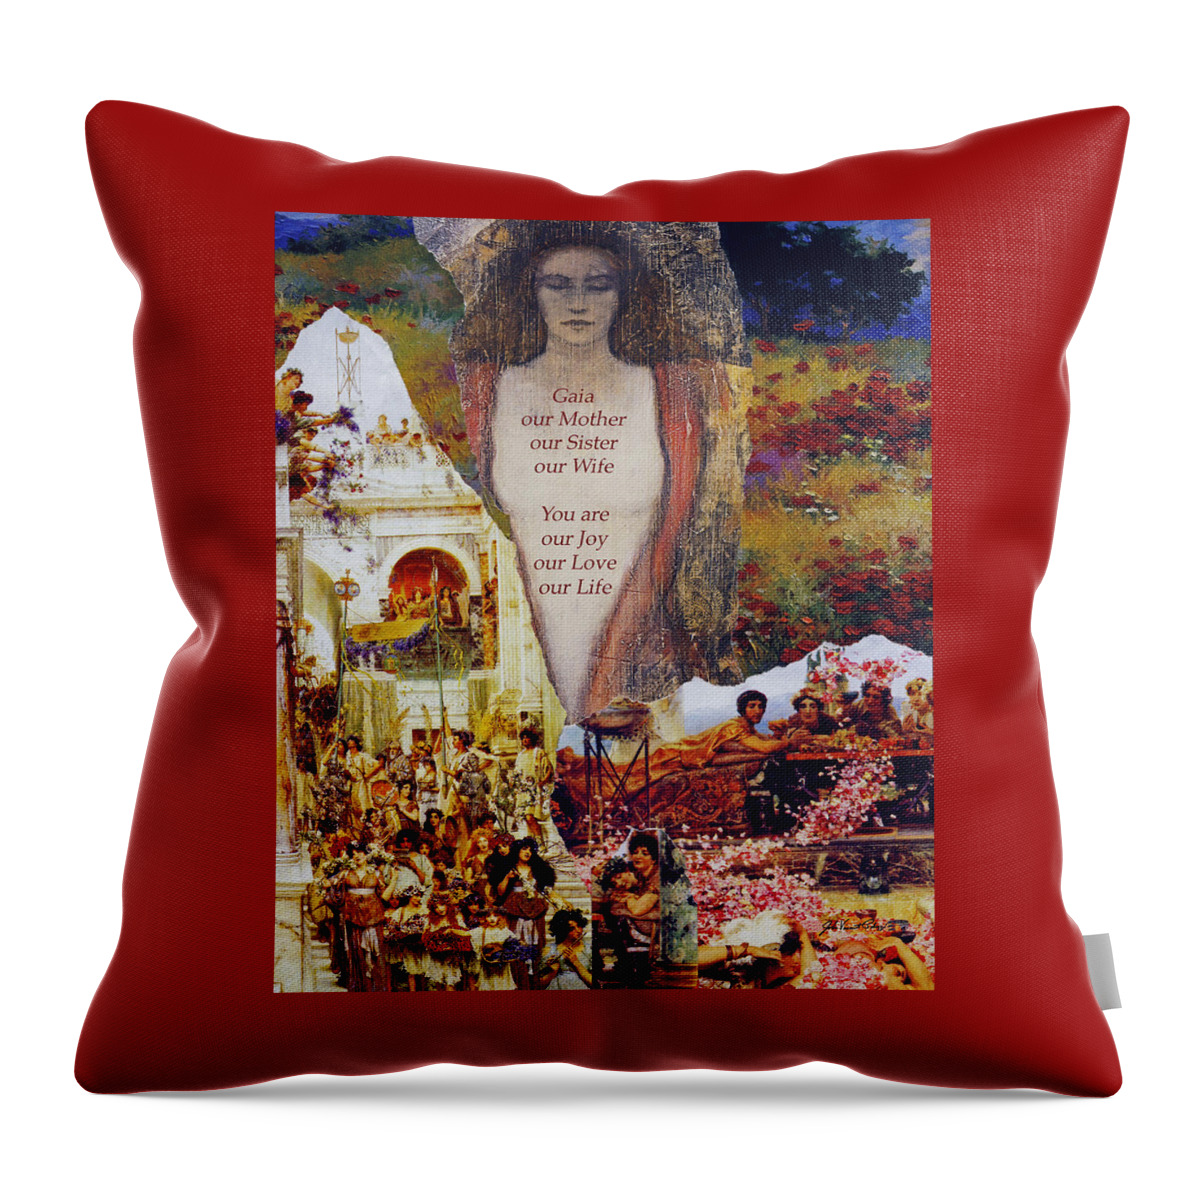 Collage Throw Pillow featuring the digital art Gaia by John Vincent Palozzi